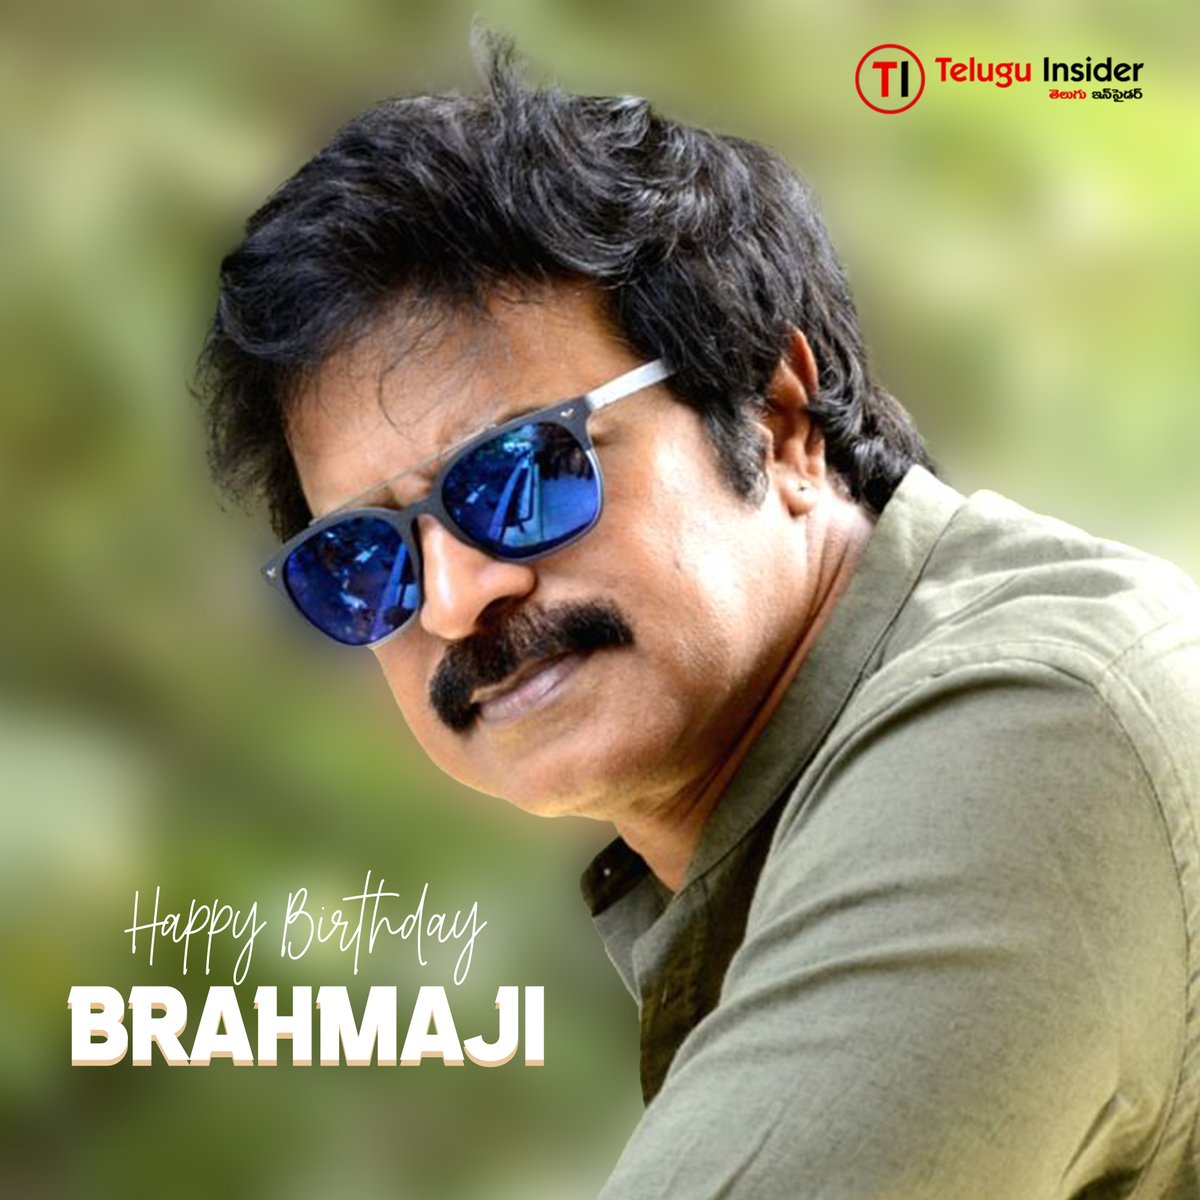 Happy Birthday to the incredibly talented @actorbrahmaji! Wishing you a fantastic year ahead and continued success in all your upcoming projects.

#HappyBirthdayBrahmaji #HBDBrahmaji #Brahmaji #TeluguInsider